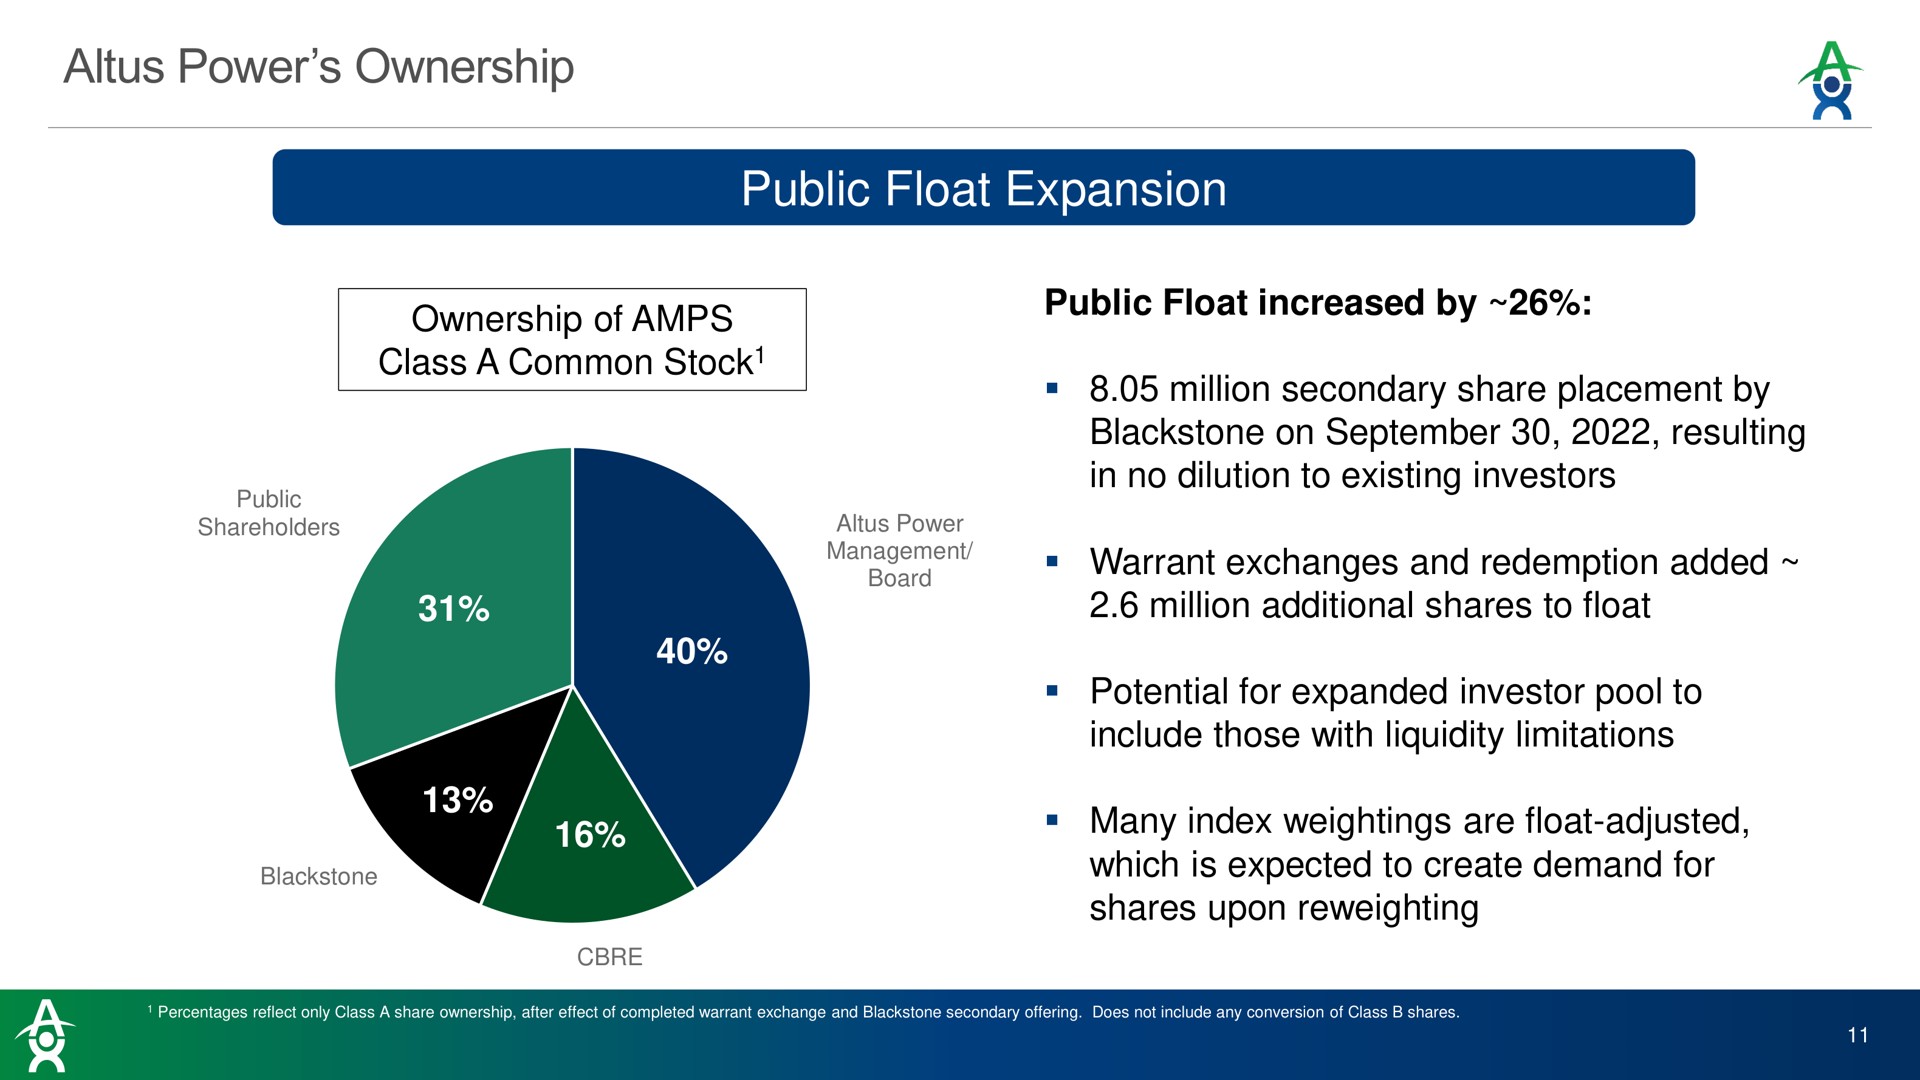 power ownership public float expansion warrant exchanges and redemption added | Altus Power